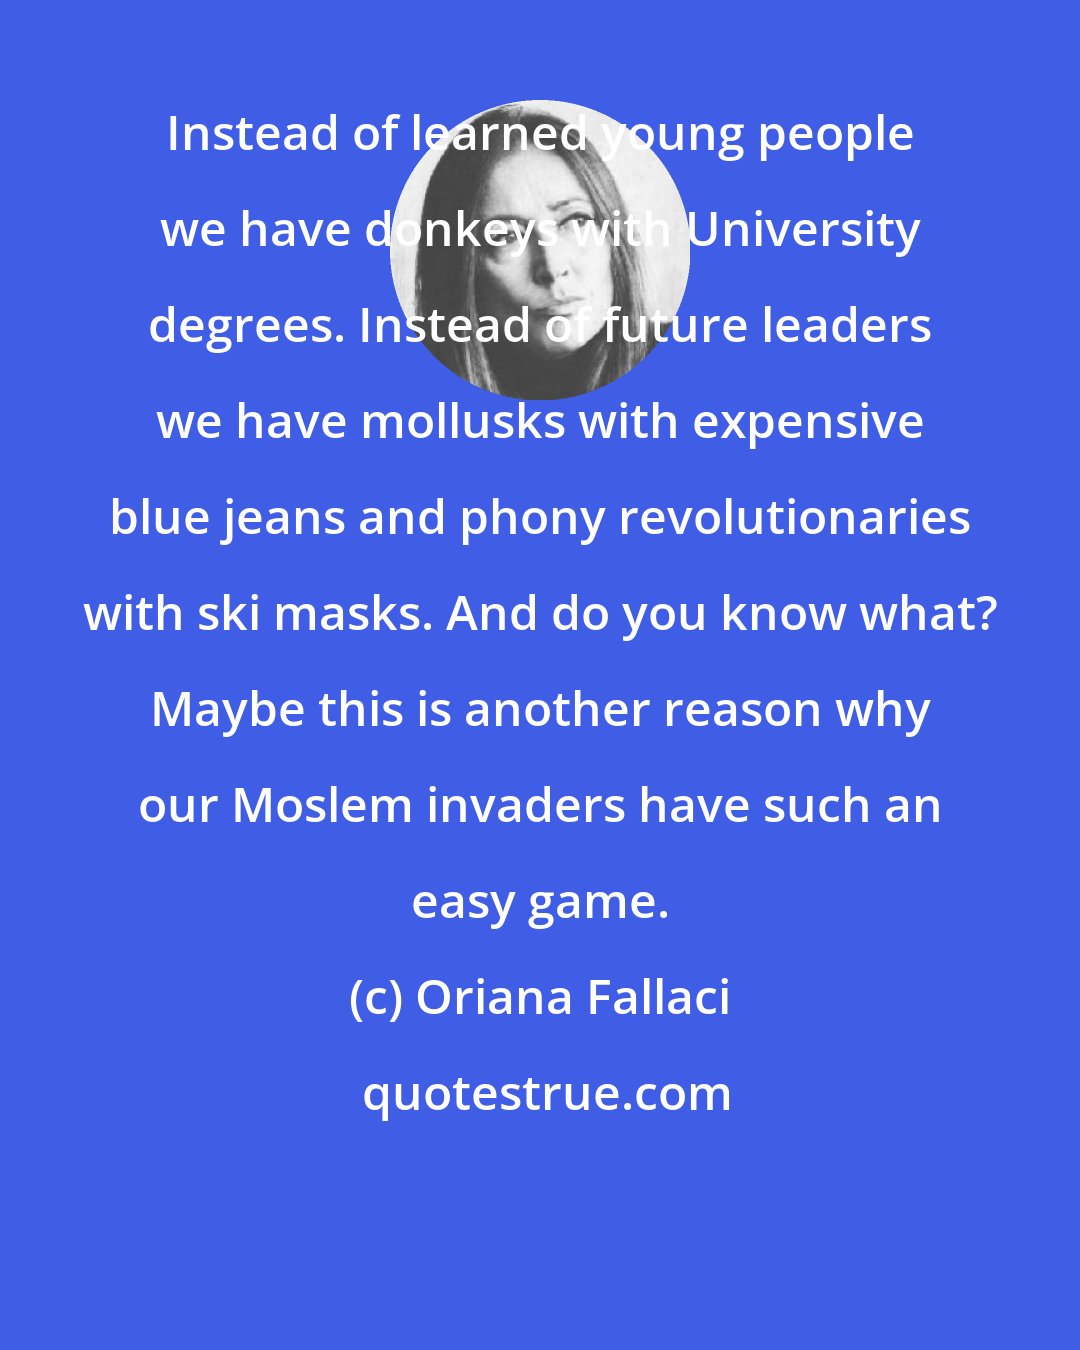 Oriana Fallaci: Instead of learned young people we have donkeys with University degrees. Instead of future leaders we have mollusks with expensive blue jeans and phony revolutionaries with ski masks. And do you know what? Maybe this is another reason why our Moslem invaders have such an easy game.